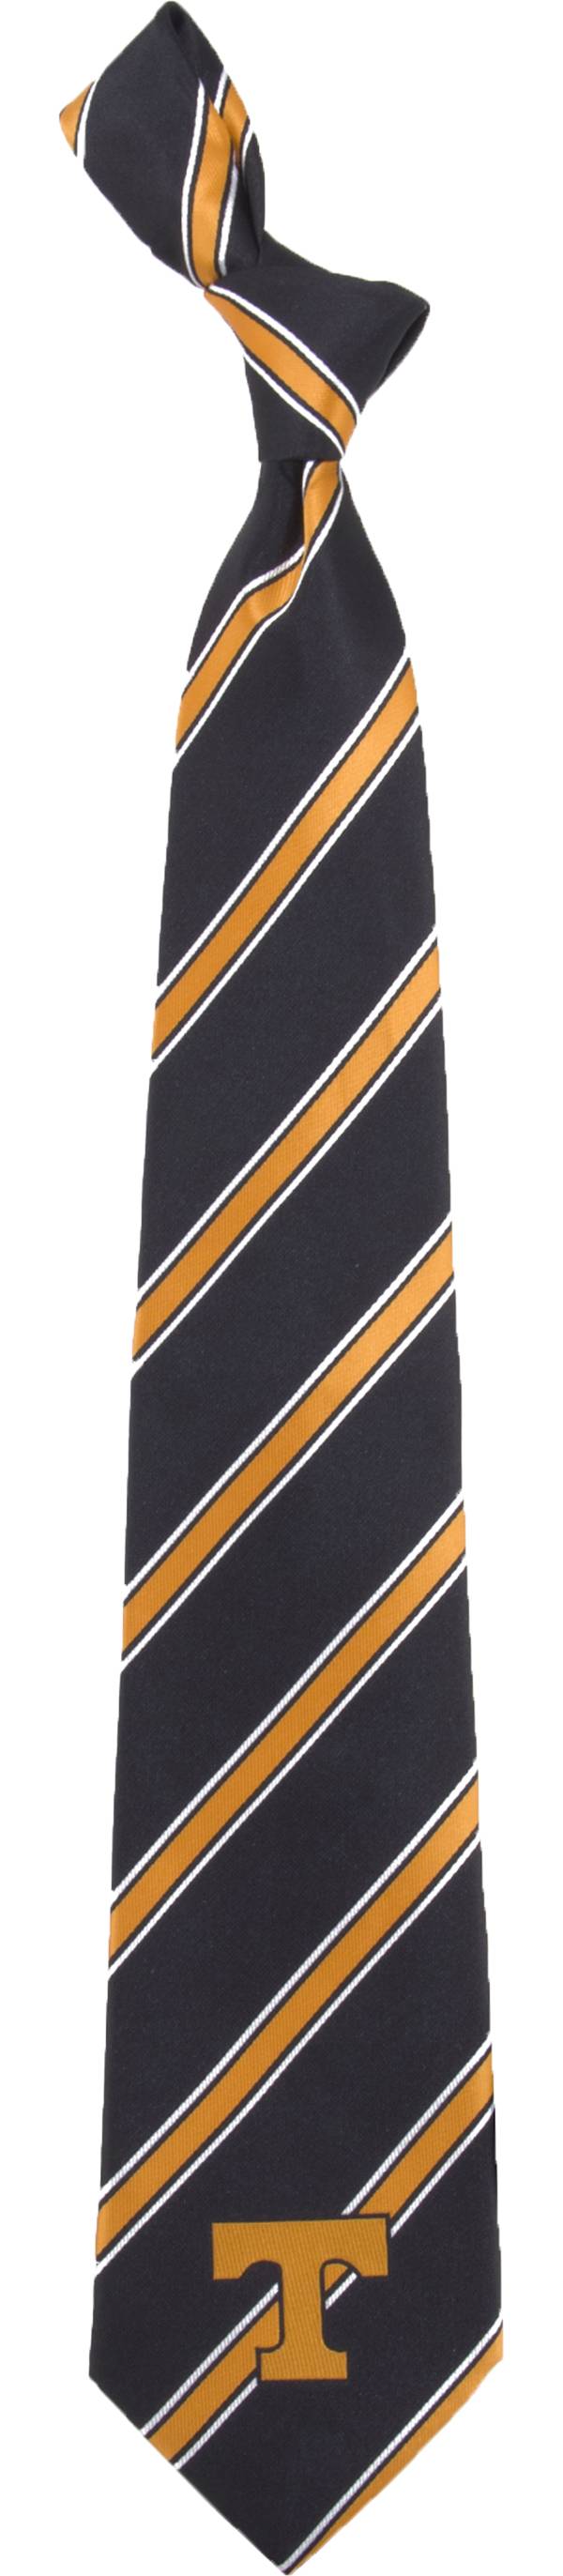 Eagles Wings Tennessee Volunteers Woven Poly 1 Necktie product image